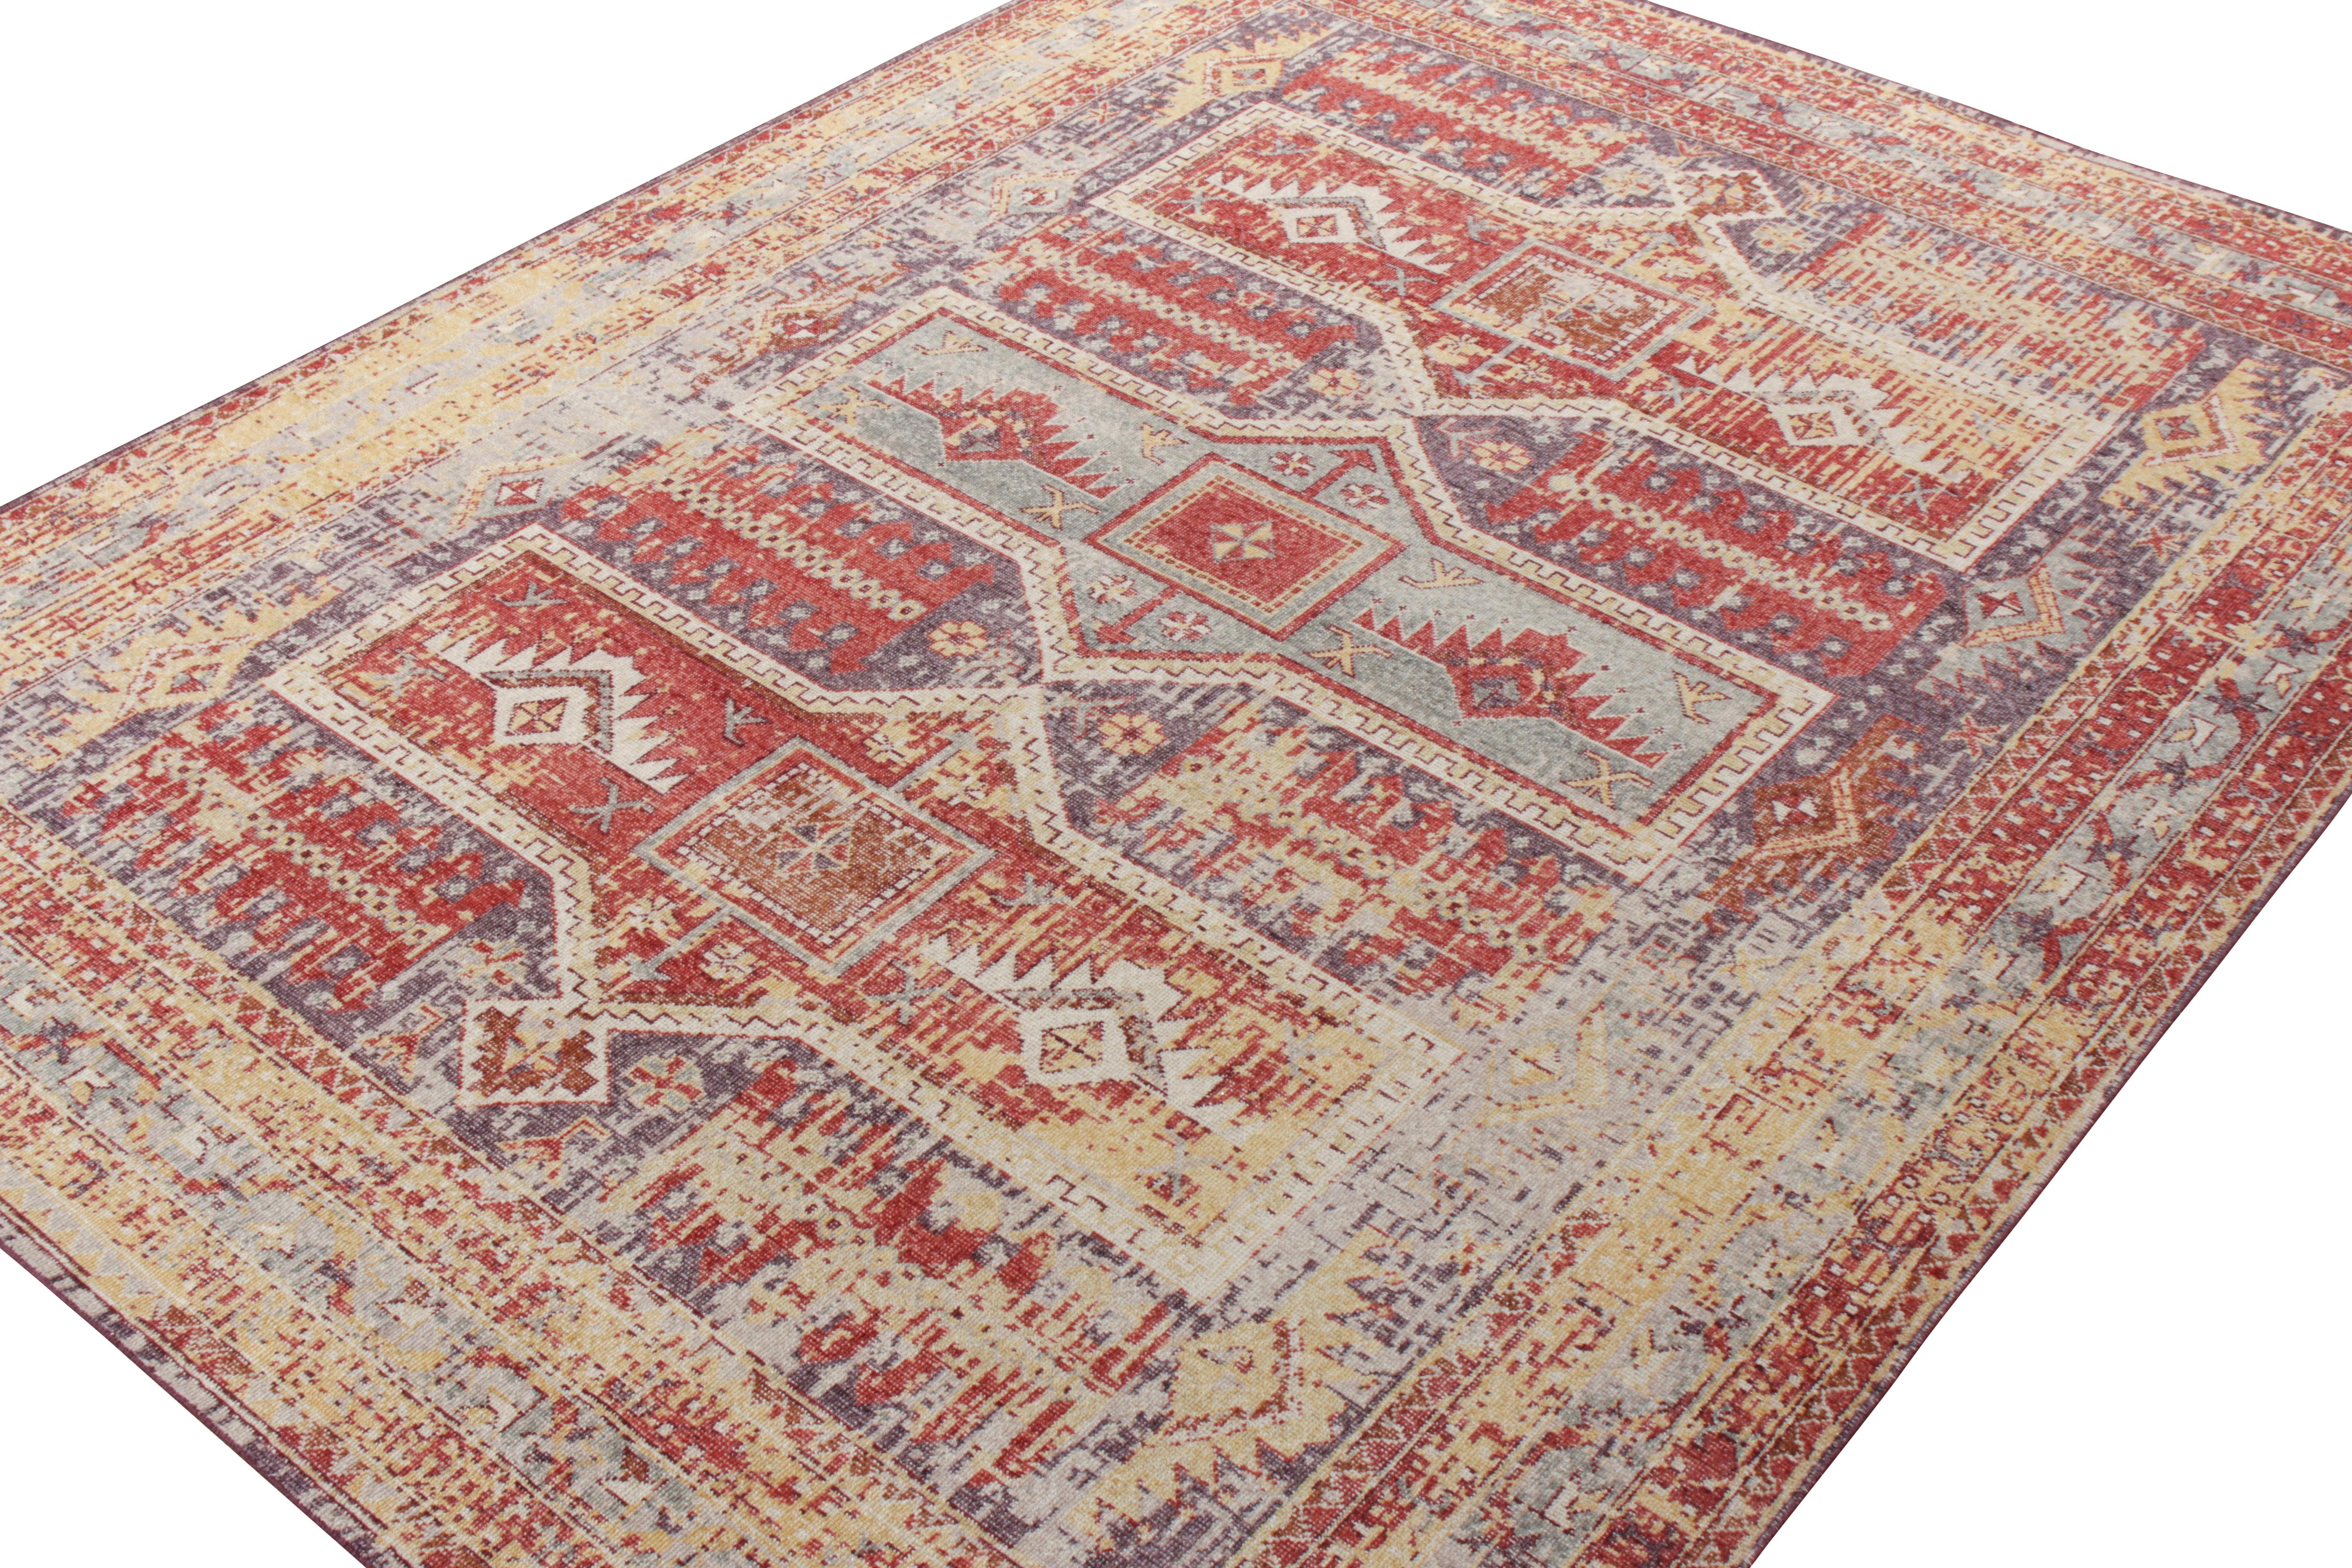 Indian Rug & Kilim’s Distressed Tribal Style Rug in Blue, Red Geometric Pattern For Sale